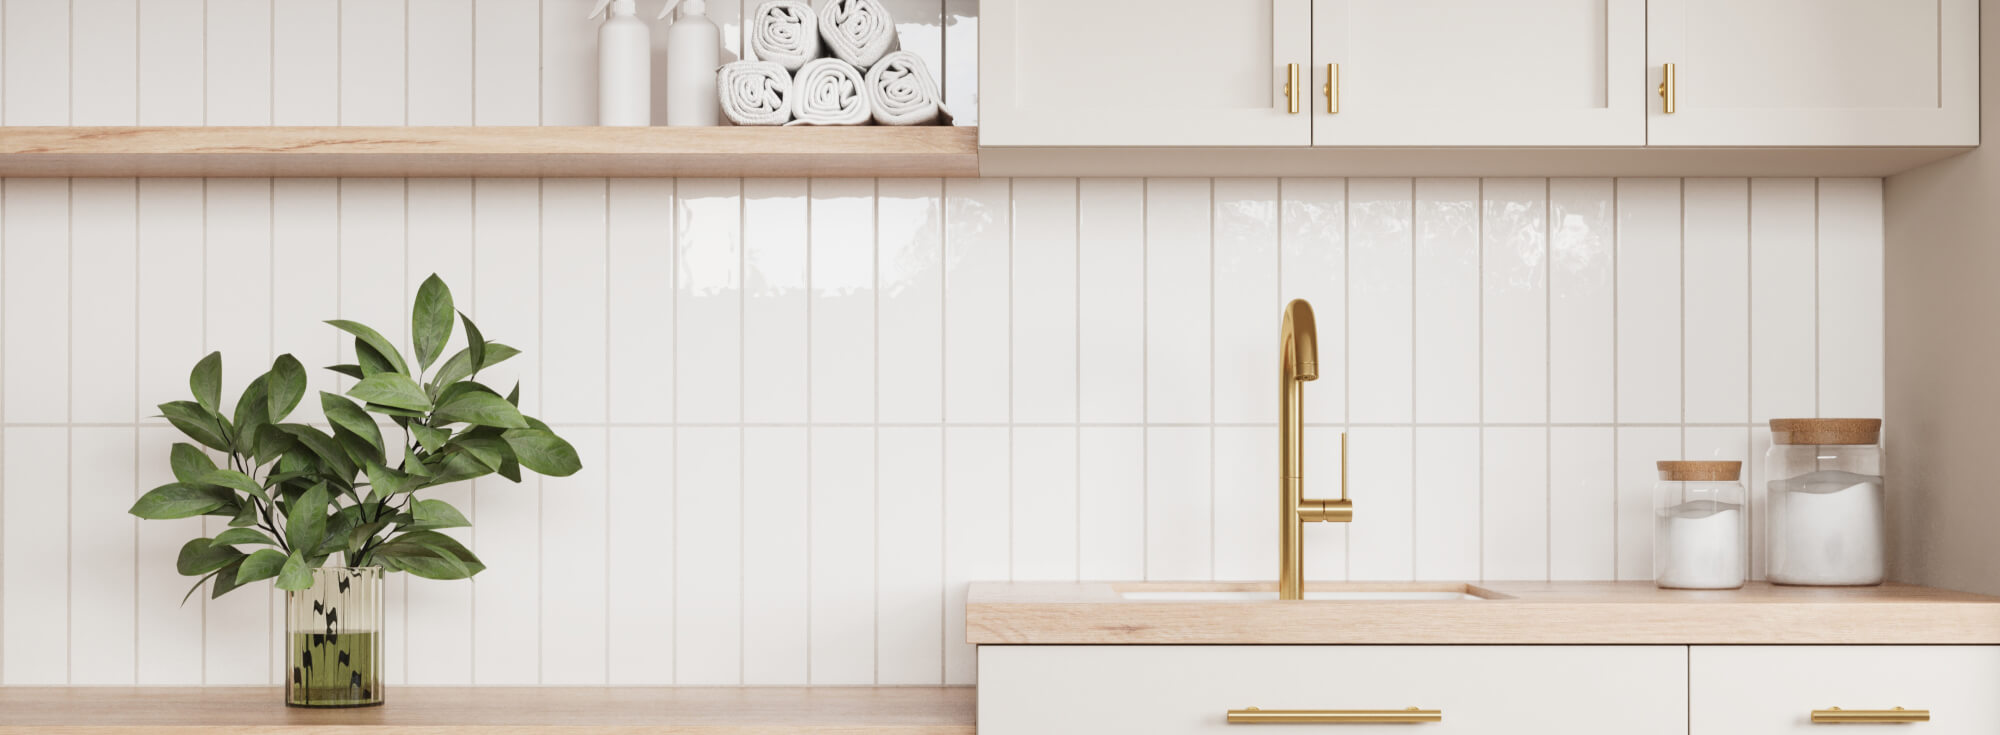 Laundry room enhanced with white subway wall tile, creating a clean, airy atmosphere with classic charm.